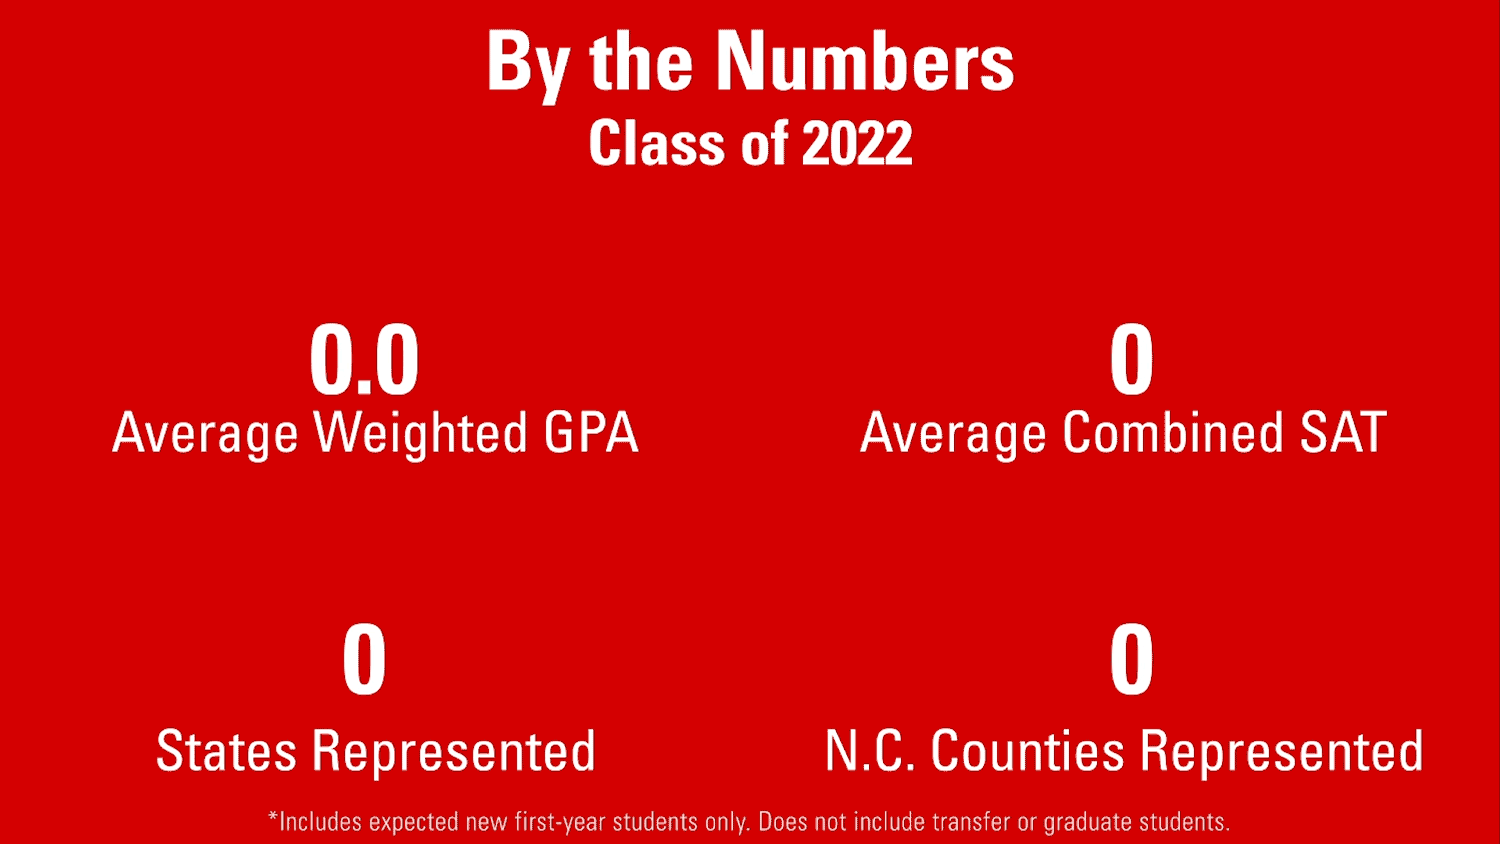 Class of 2022 is one of the college's strongest academically in its history with an average weighted GPA of 4.5, average combined SAT score of 1245. They come from 12 states and 32 counties in North Carolina.